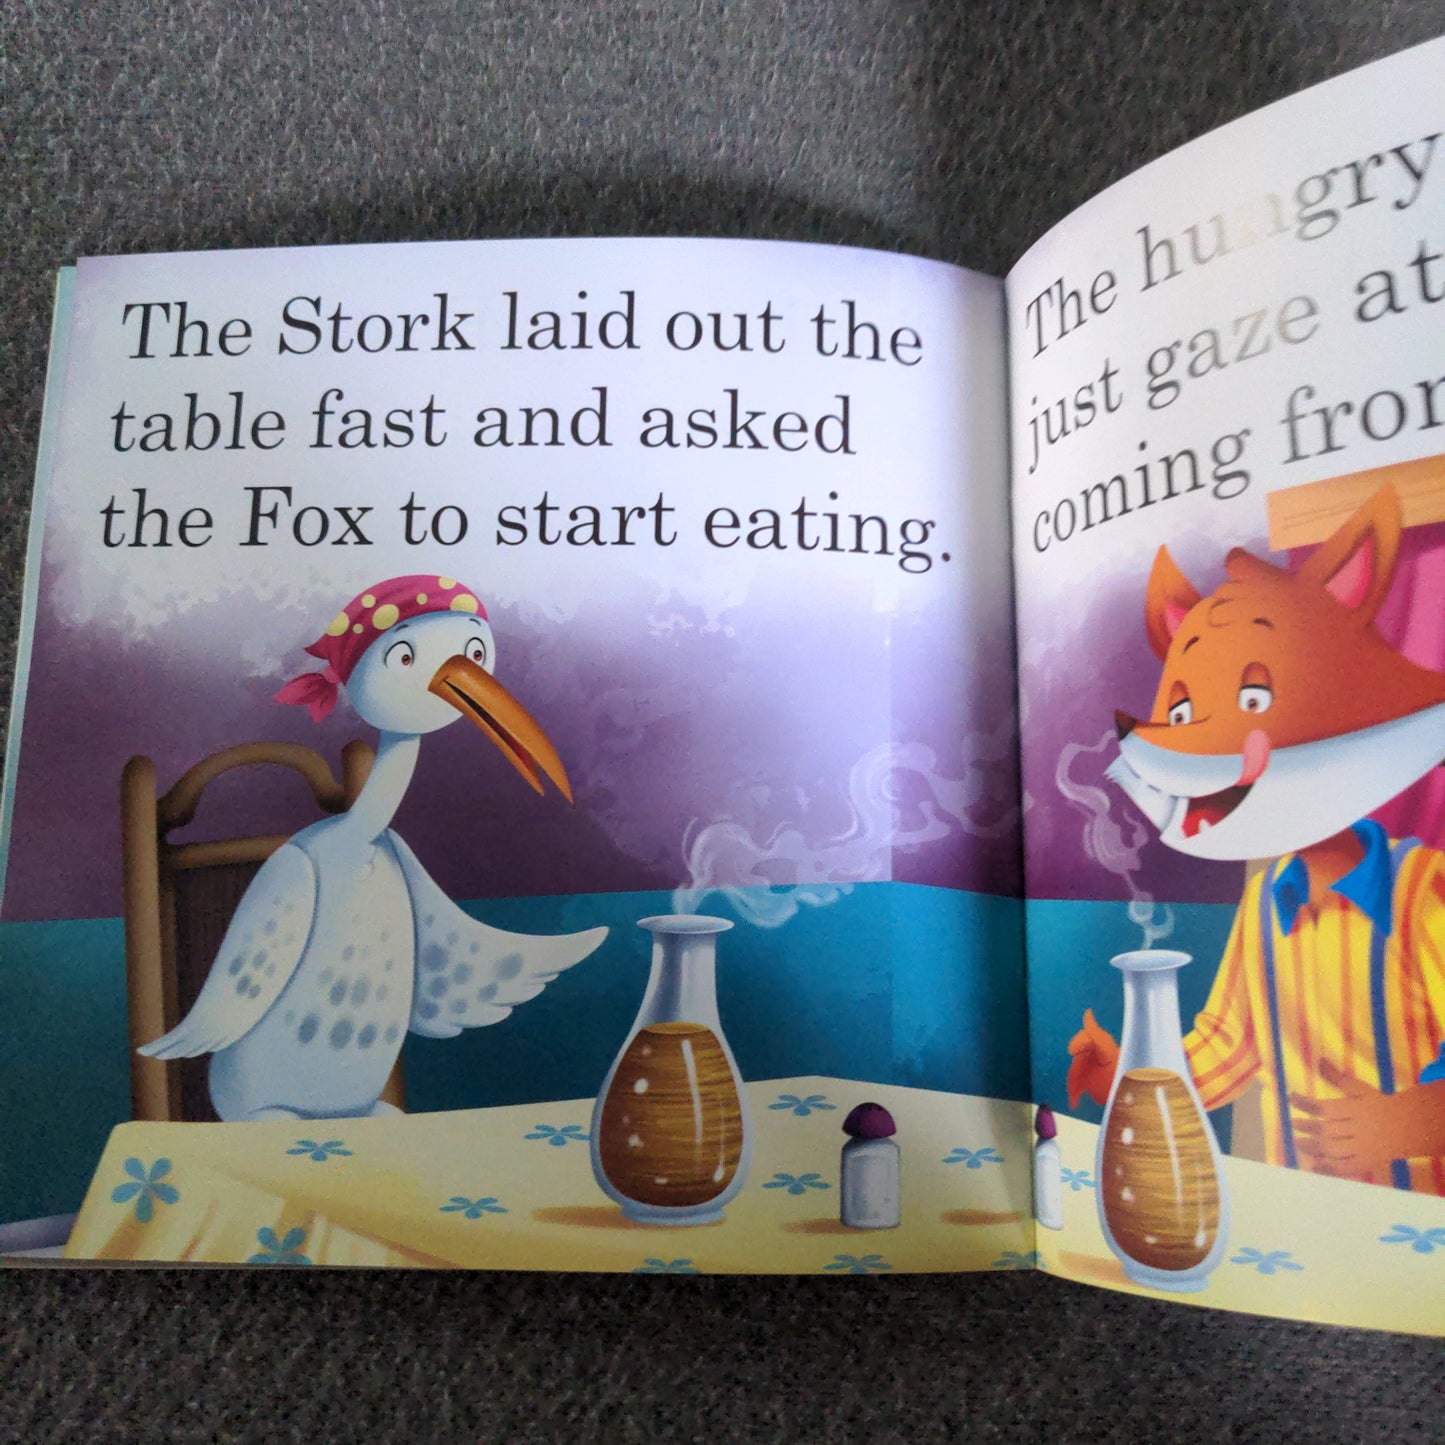 The Fox and the Stork - Large Print